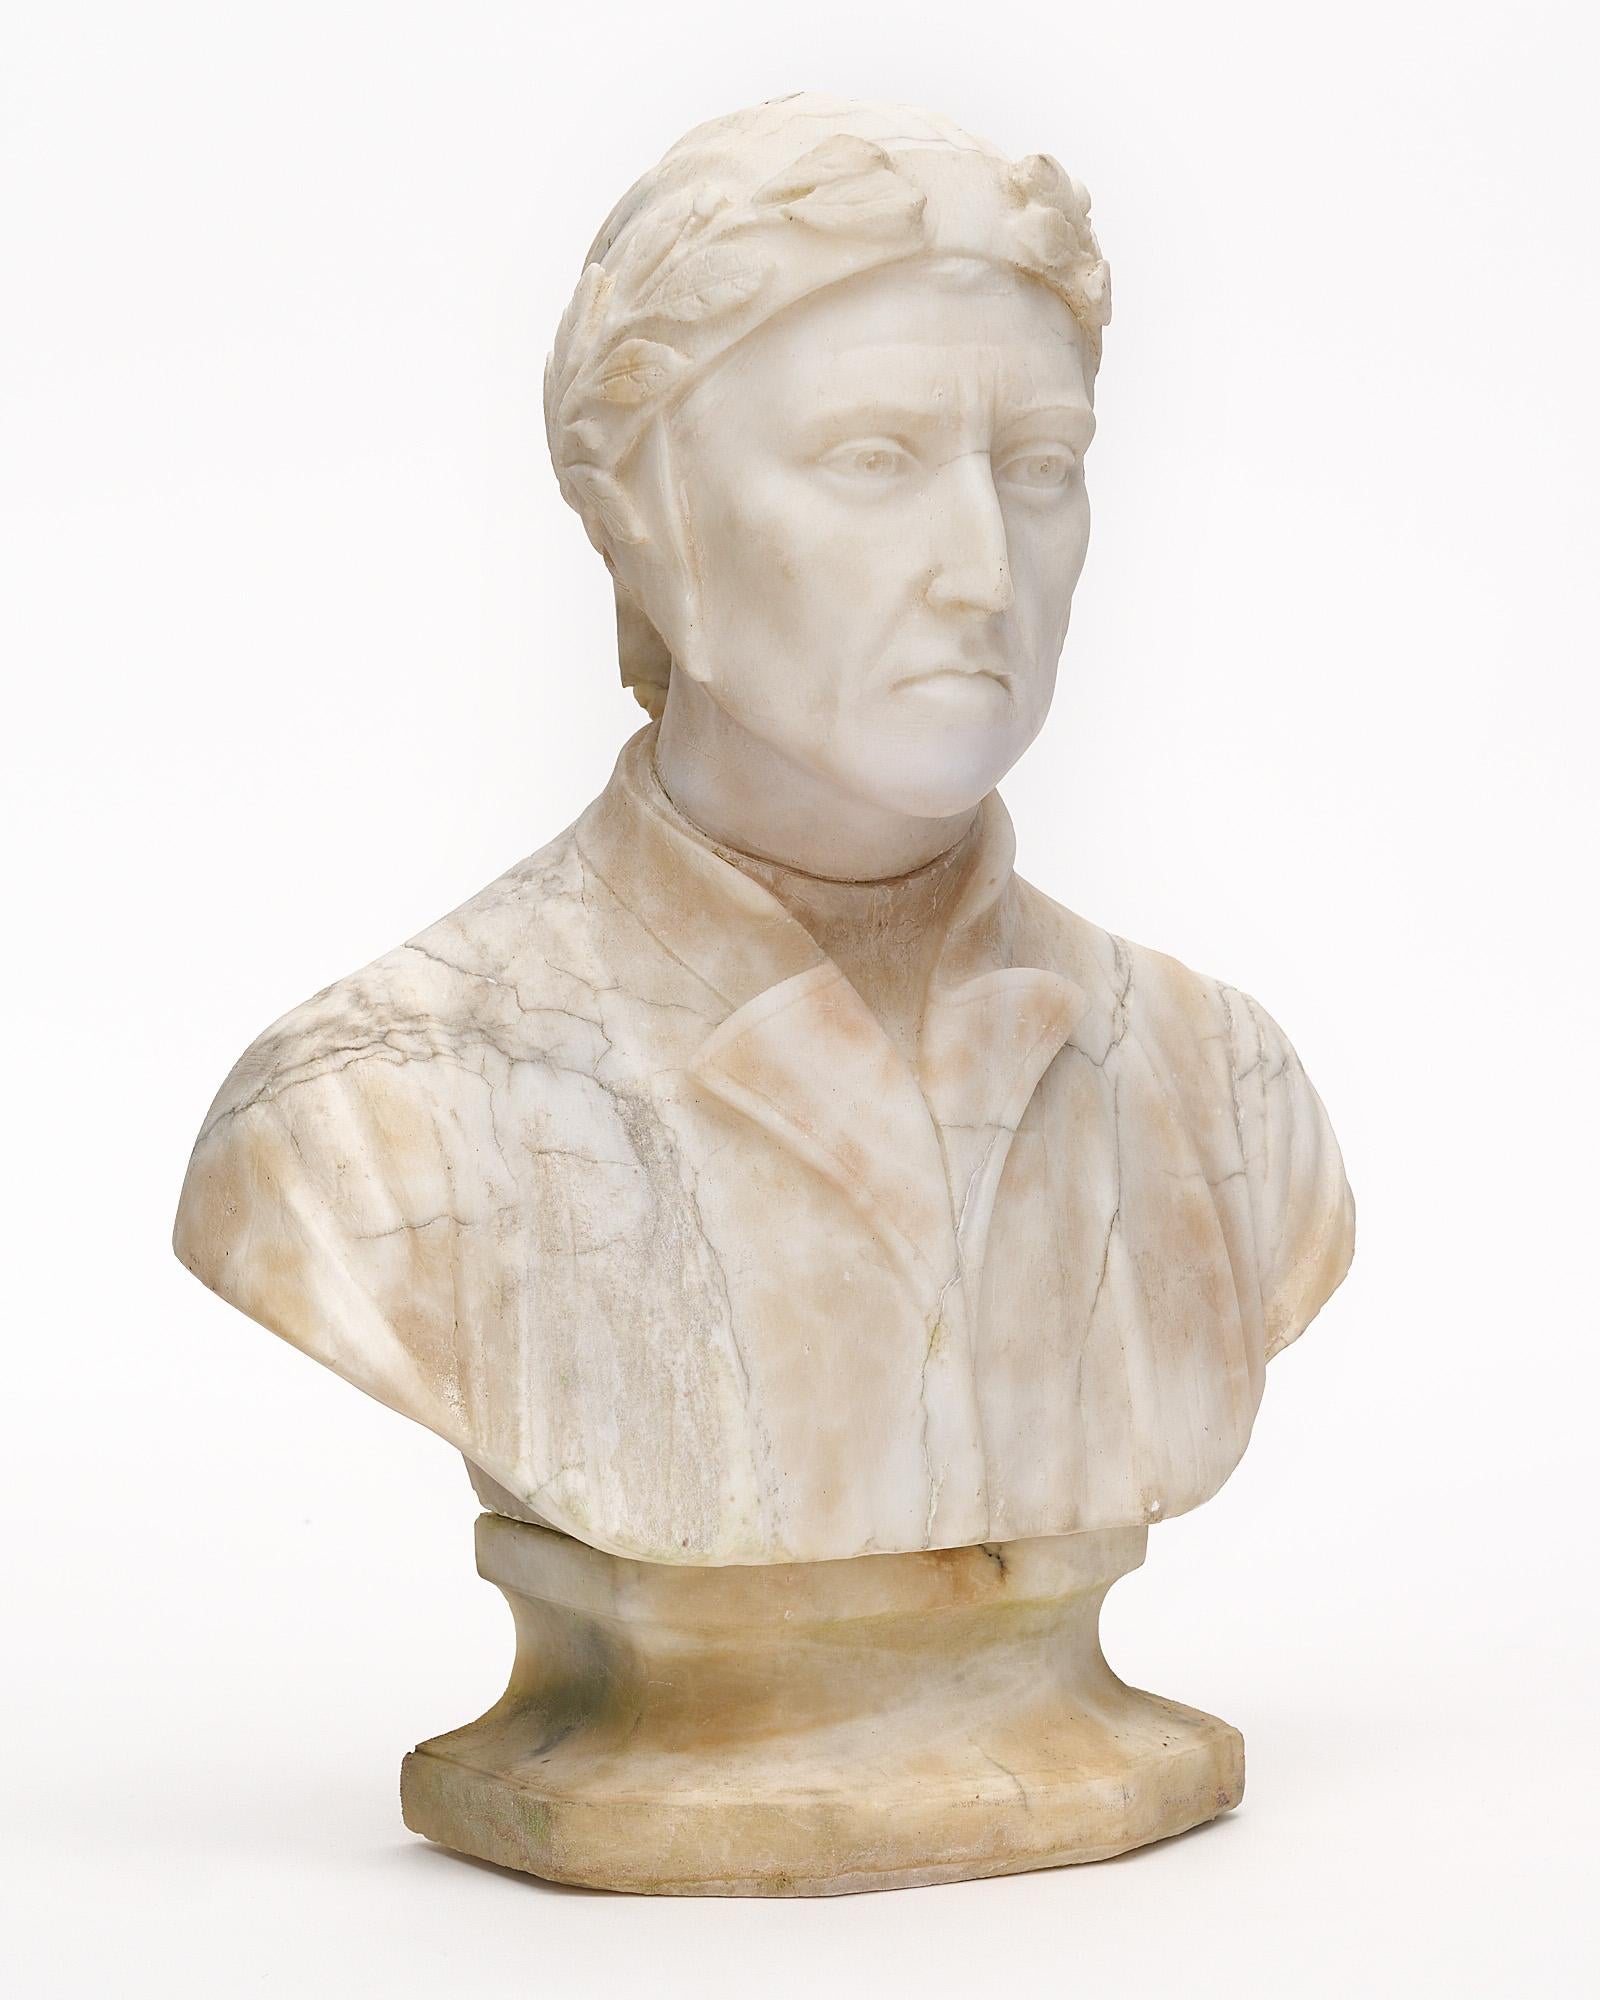 Bust of Dante Alighieri from France made of Carrara marble. This hand-carved sculpture portrays a lifelike Dante, the famous Florentine writer often described as the father of the Italian language. He is shown in a classic pose with a stoic